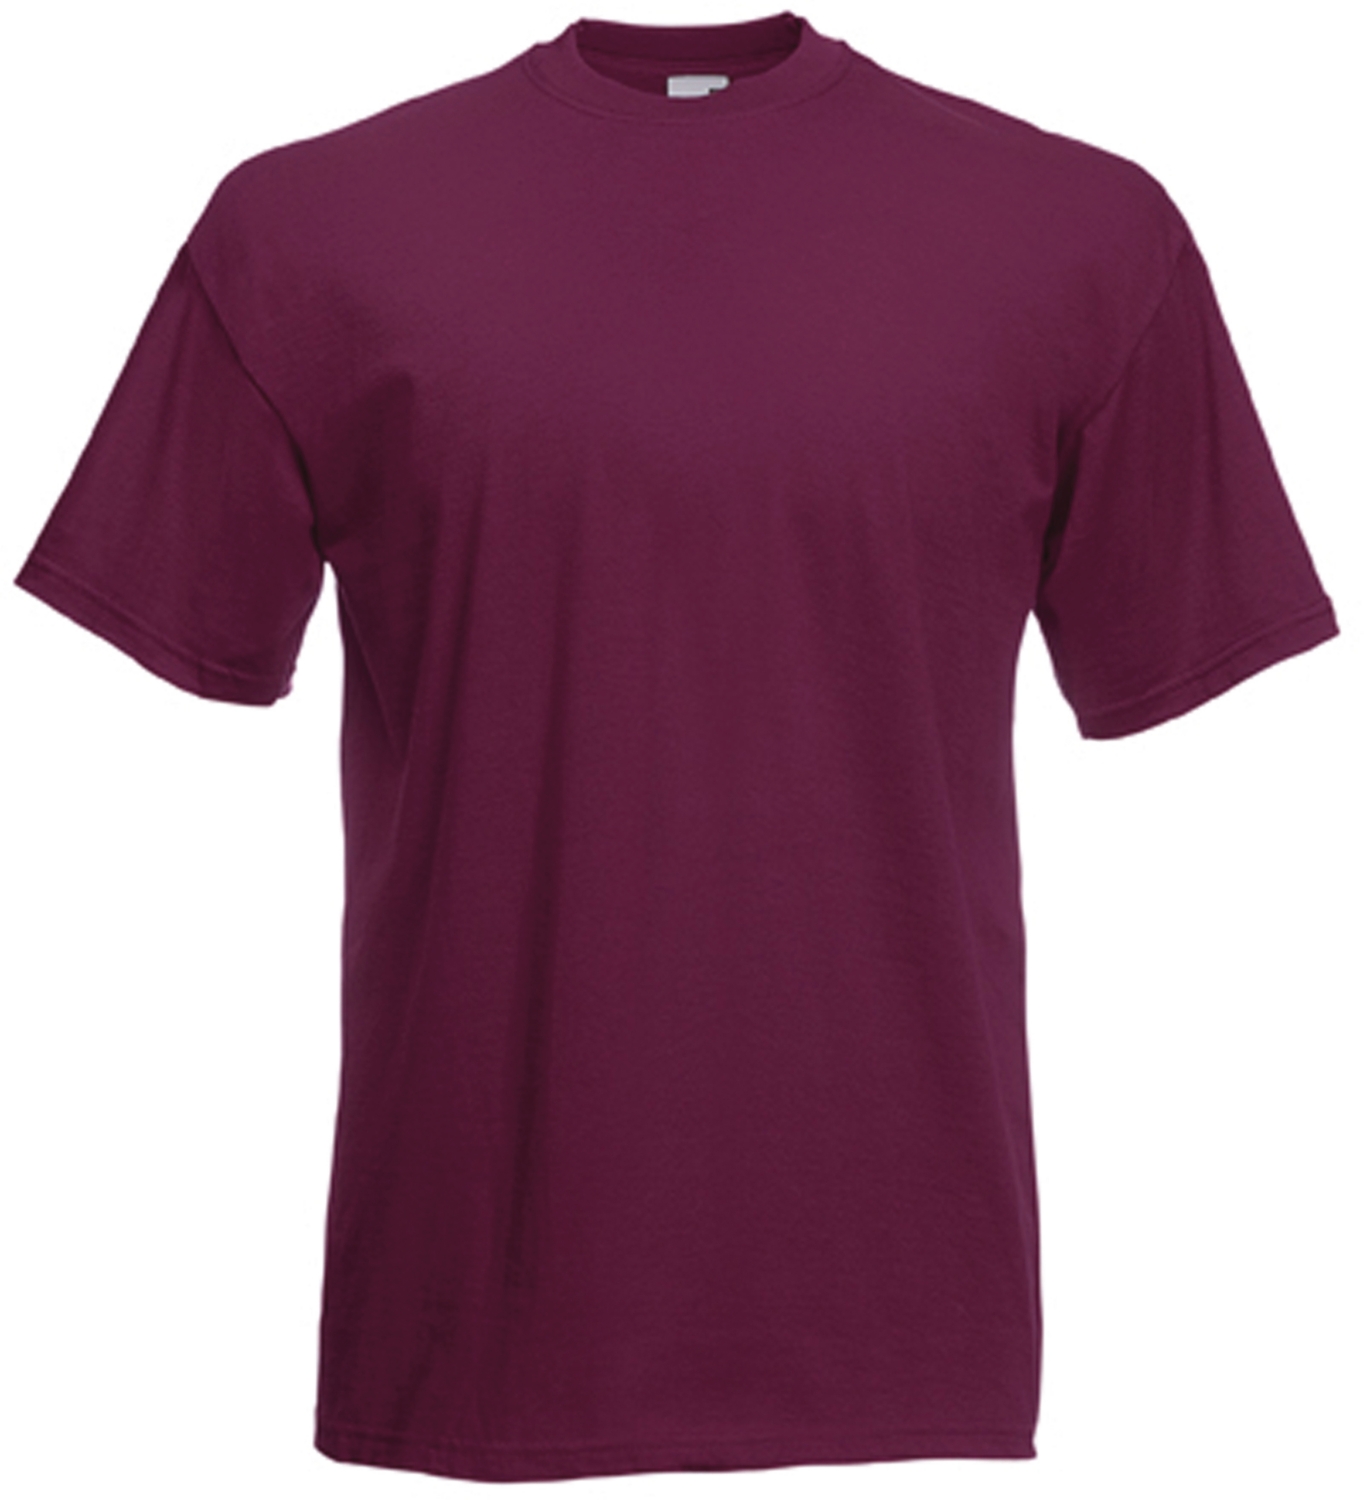 Tee-shirt Value-Weight - Bordeaux Fruit Of The Loom